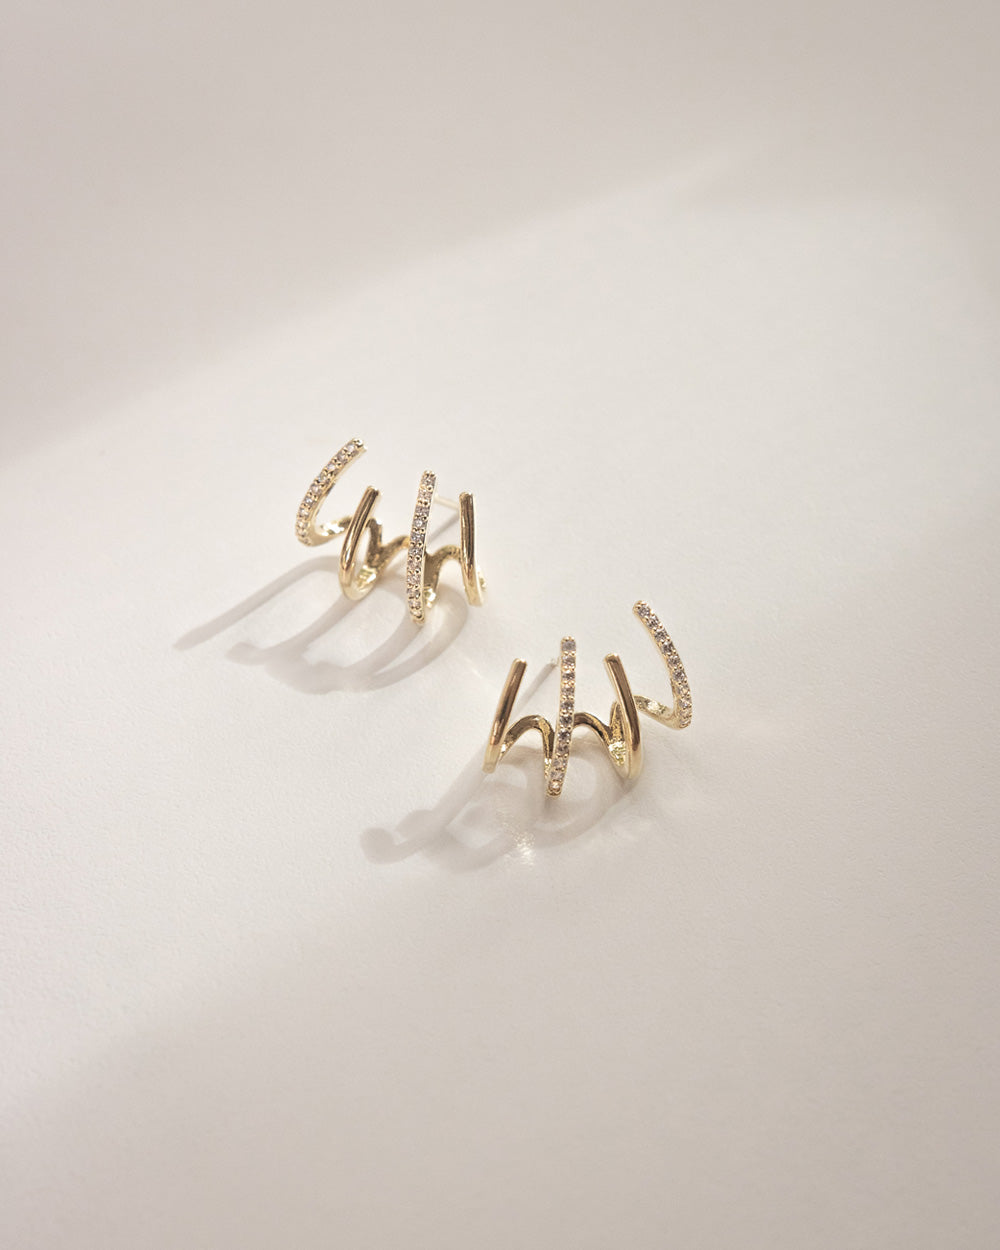 Four Claw Earrings in Gold